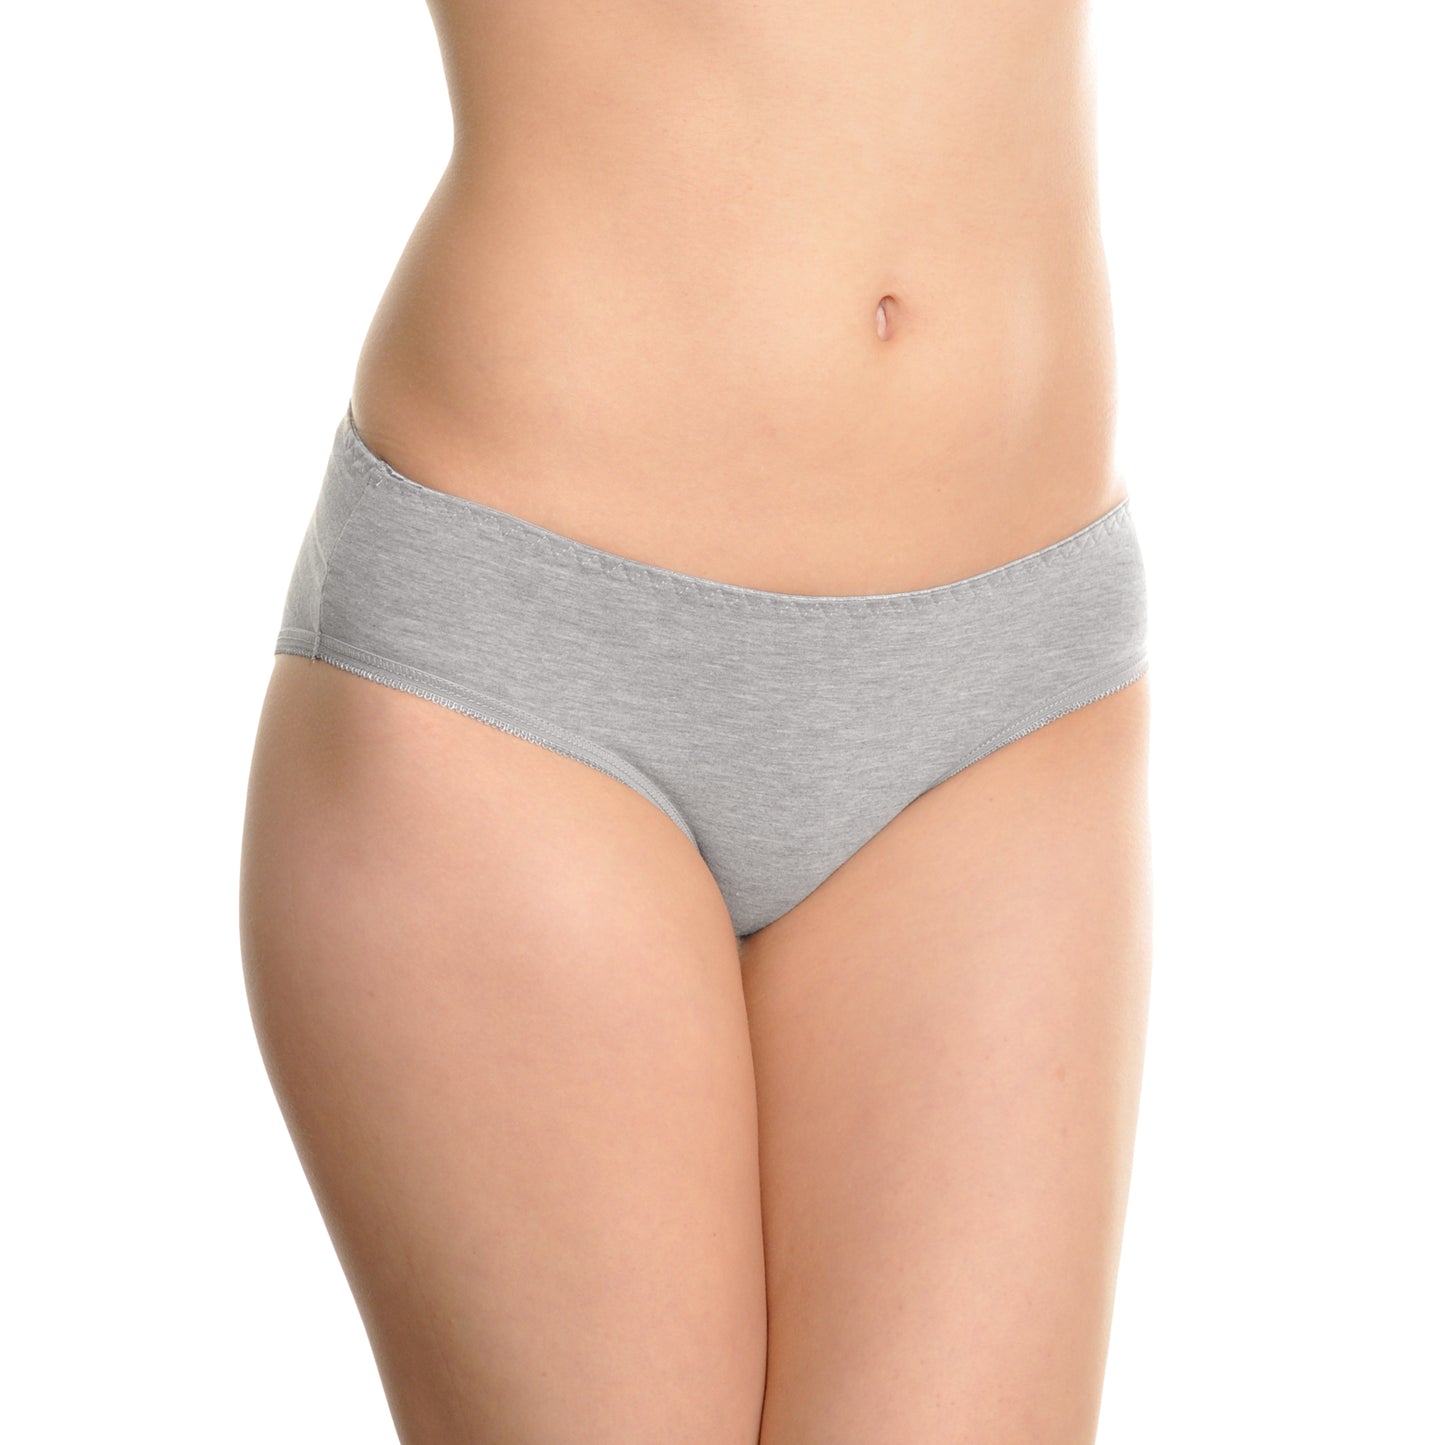 Angelina Cotton Bikini Panties with Ruched Center Back (12-Pack), #G6085